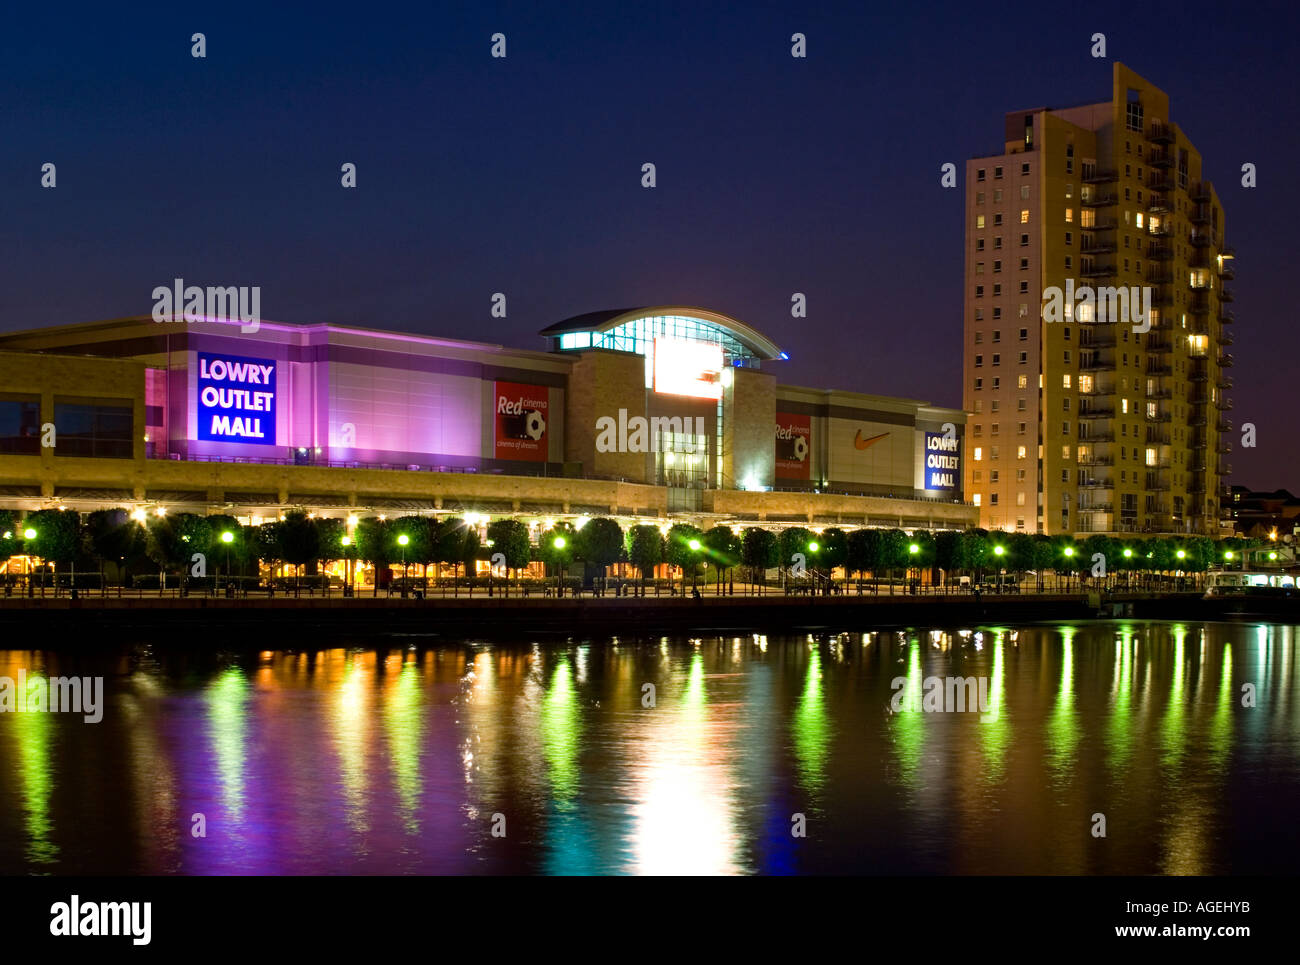 The Lowry Outlet Shopping Mall at Night, Salford Quays, Greater Manchester, England, UK Stock Photo